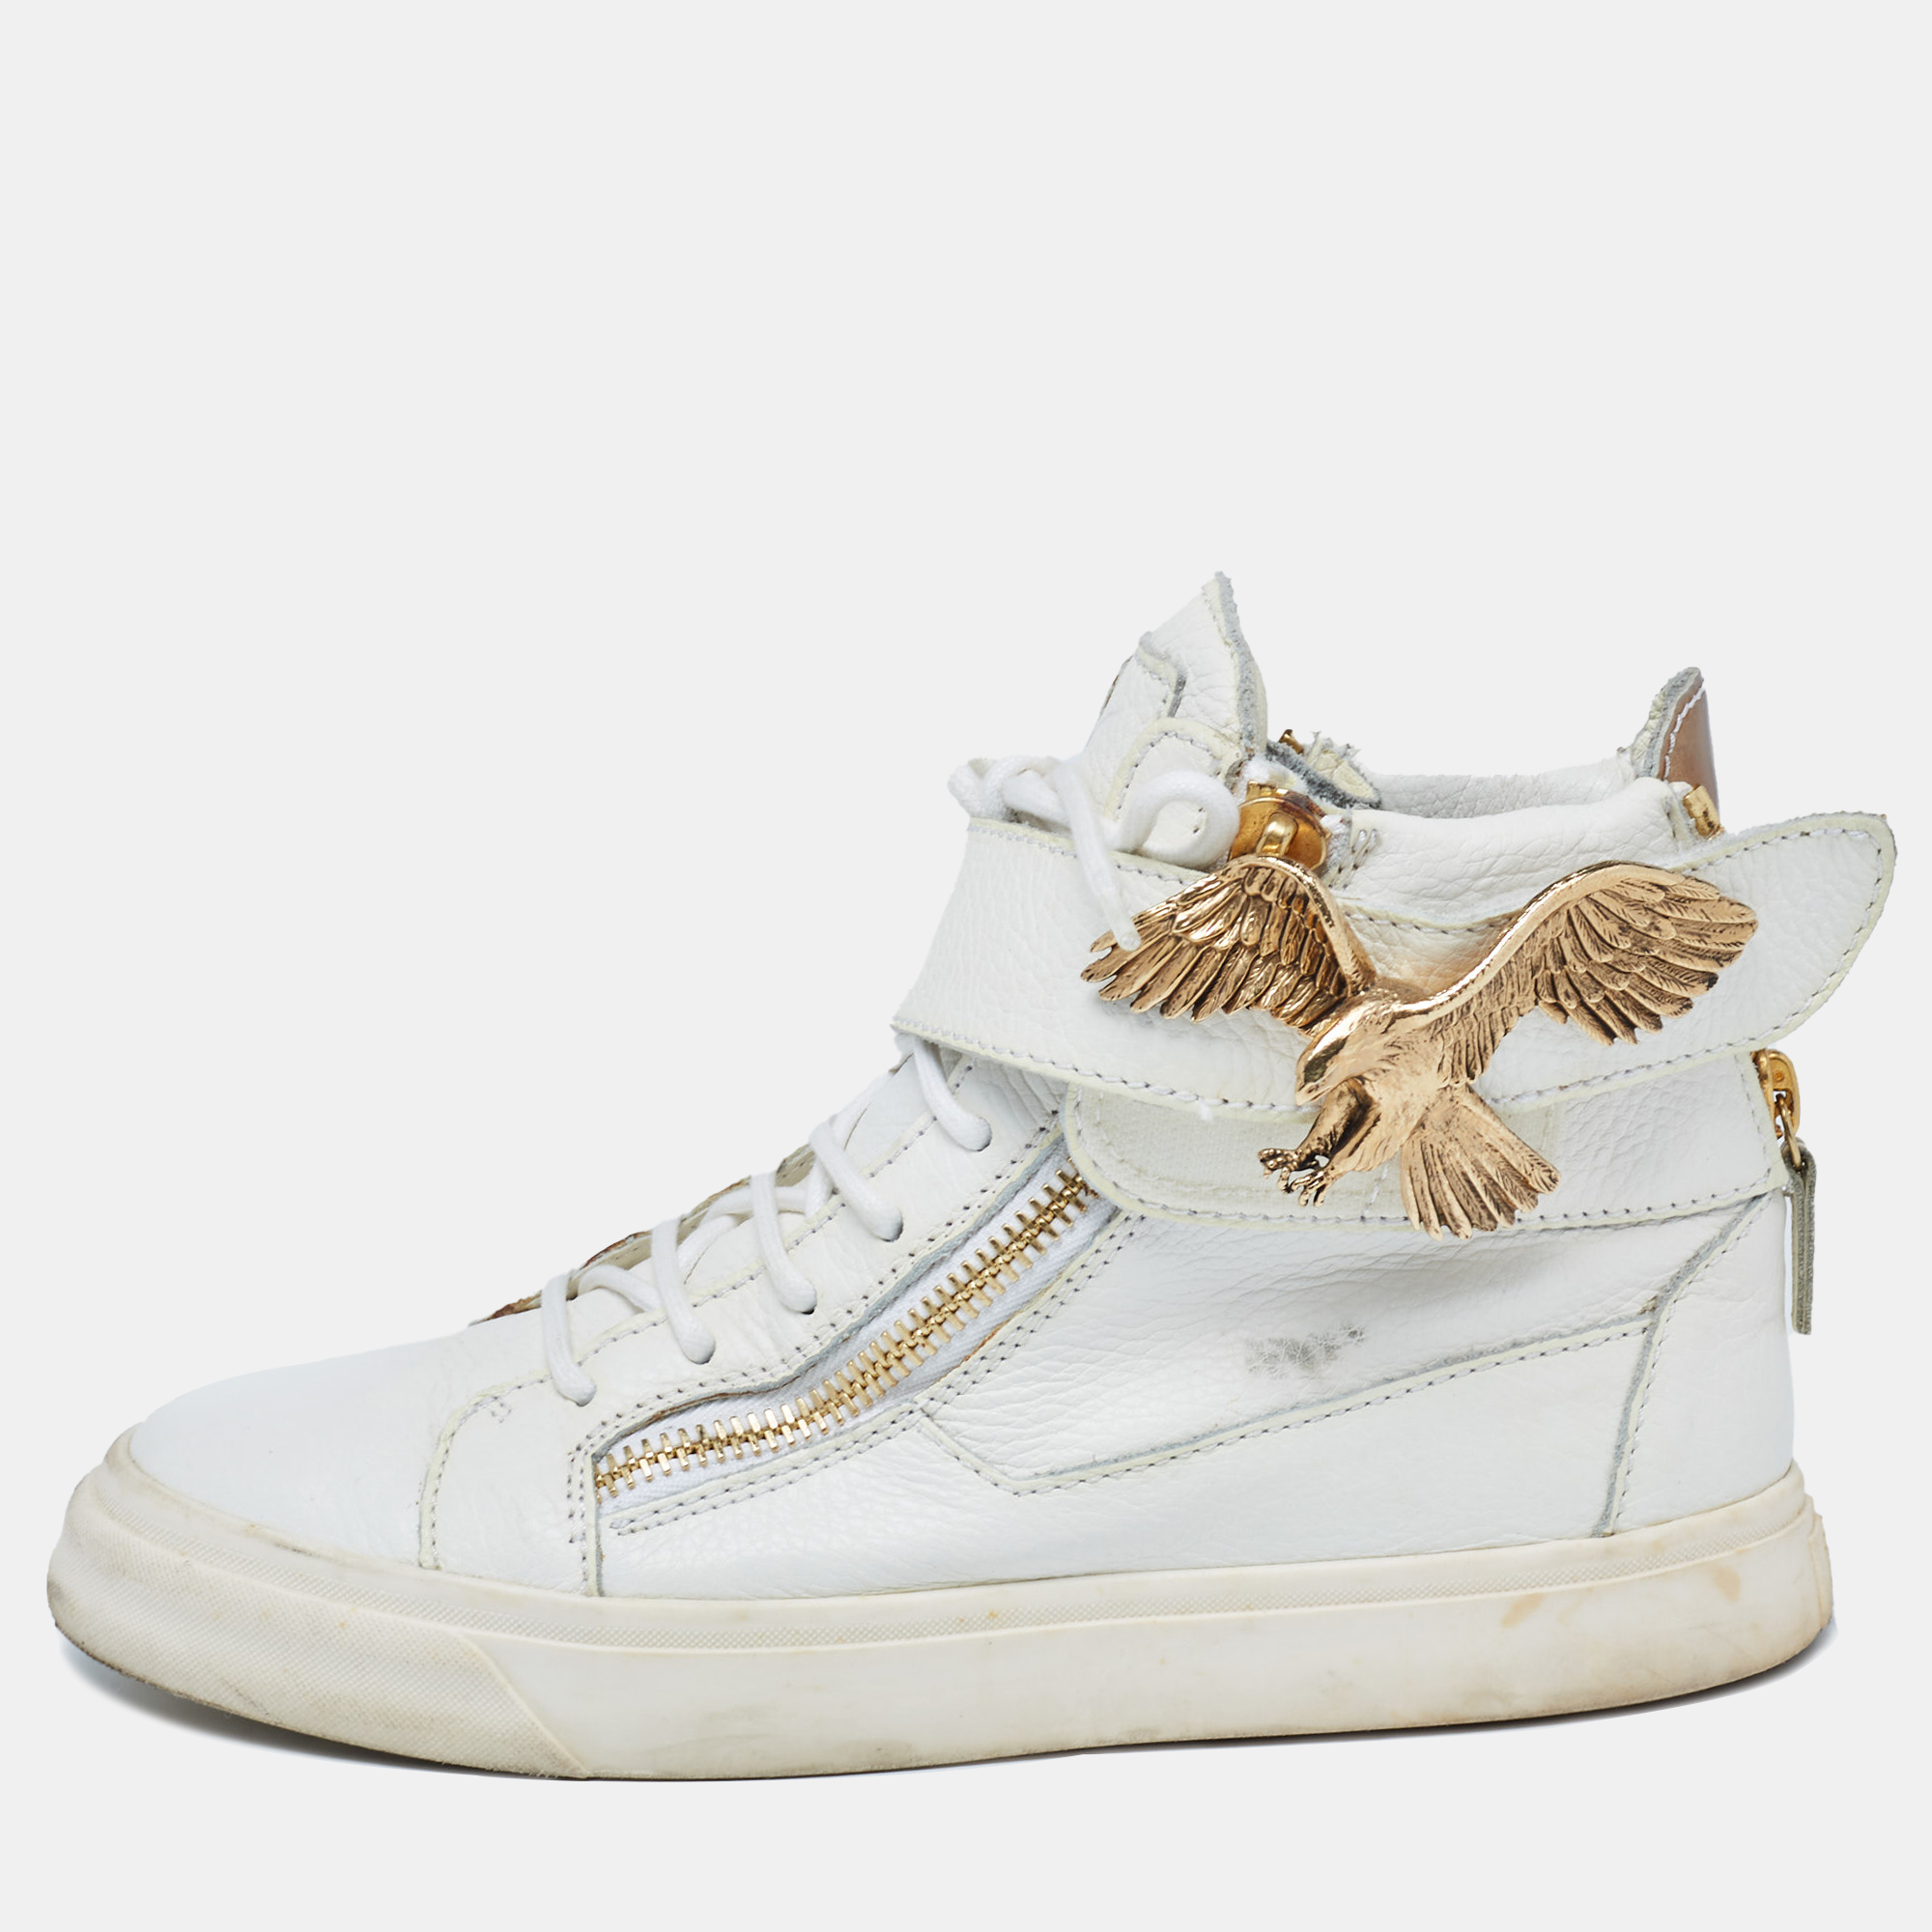 The rubber sole of these Giuseppe Zanotti sneakers will ensure optimal grip while walking. Constructed from leather the design is made eye catching with gold tone embellishments and they feature lace up vamps. The zipper details on the front and on the counter make these shoes an easy to wear pair.